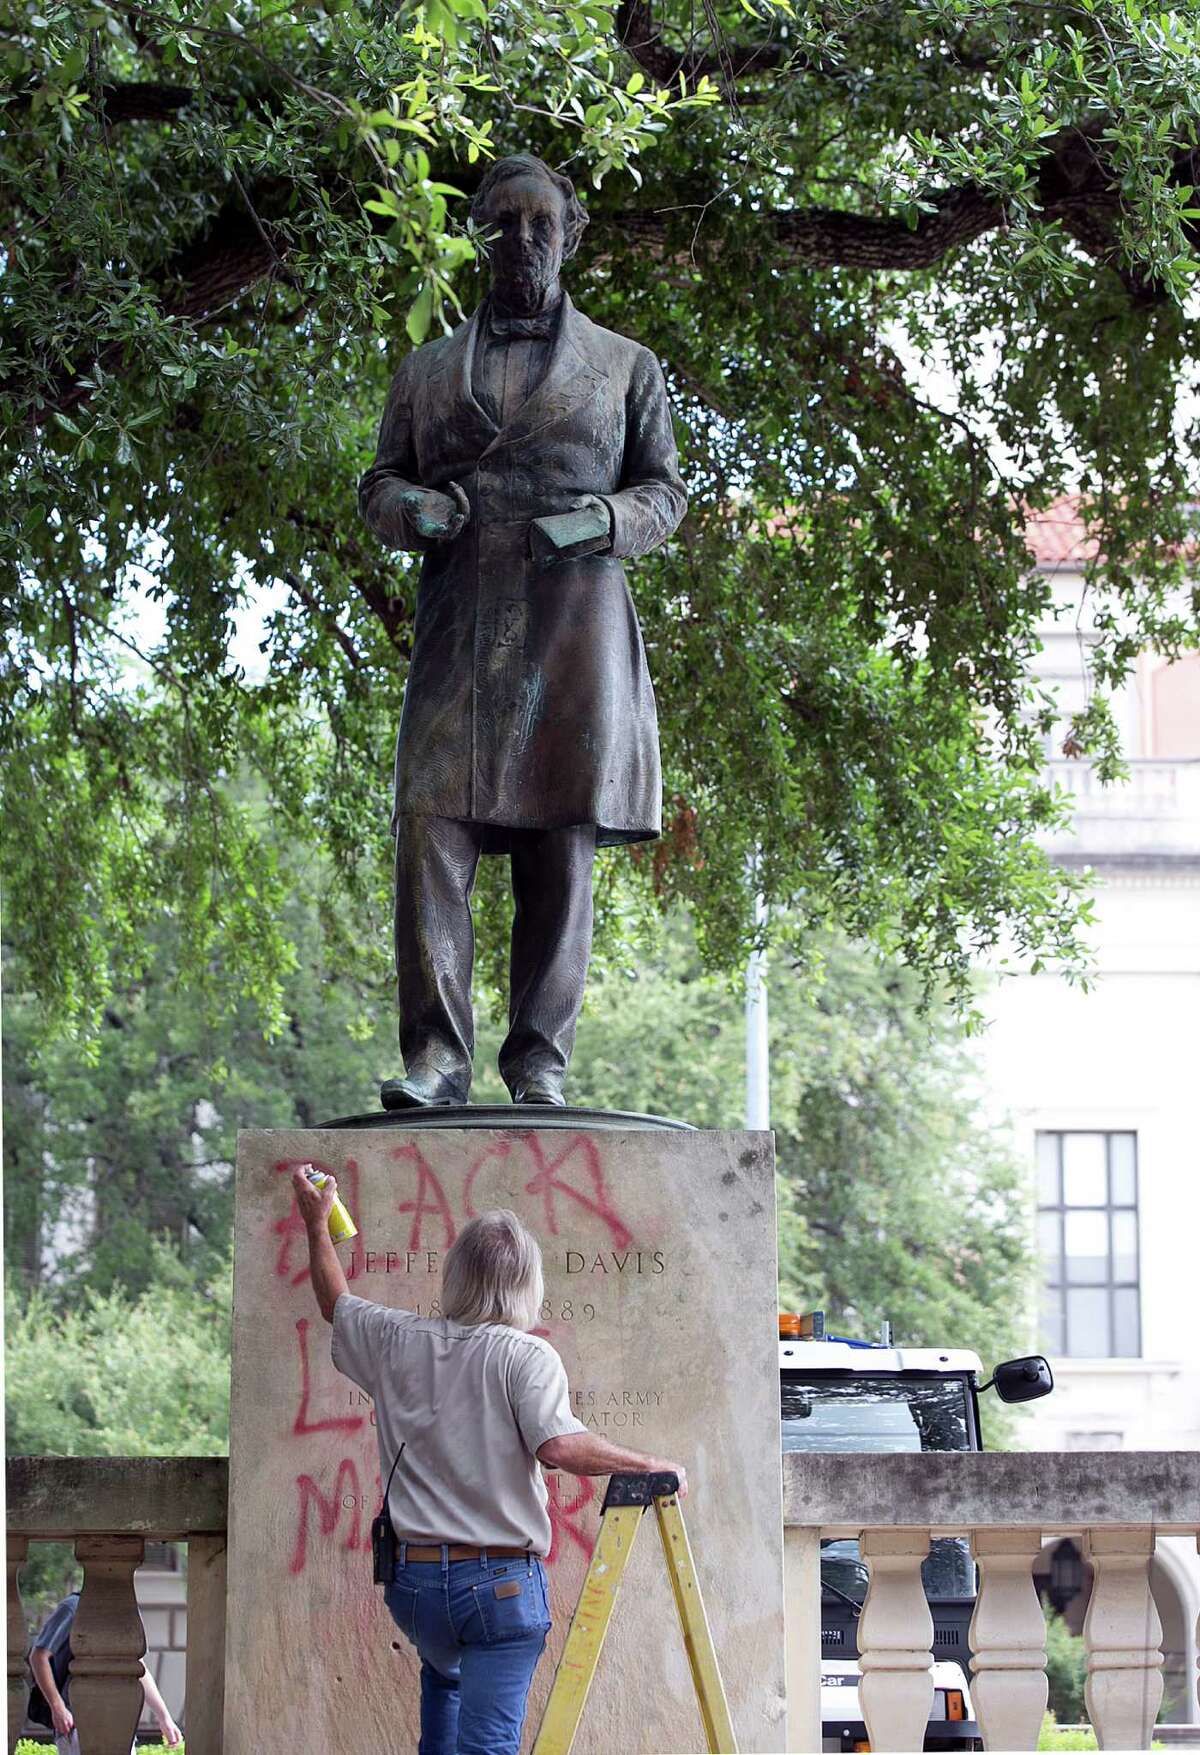 Bill Tanner with UT Facilities Services works to remove graffiti from a statue of Jefferson Davis on the south mall at the University of Texas campus in Austin, Texas, on Tuesday, June 23, 2015. Cindy Posey, spokeswoman for campus security at UT, says “Black lives matter” was scrawled early Tuesday on the base of the statue to the president of the Confederacy, and also on those for Confederate Gens. Robert E. Lee and Albert Johnston. (Dborah Cannon/Austin American-Statesman via AP) AUSTIN CHRONICLE OUT, COMMUNITY IMPACT OUT, INTERNET AND TV MUST CREDIT PHOTOGRAPHER AND STATESMAN.COM, MAGS OUT